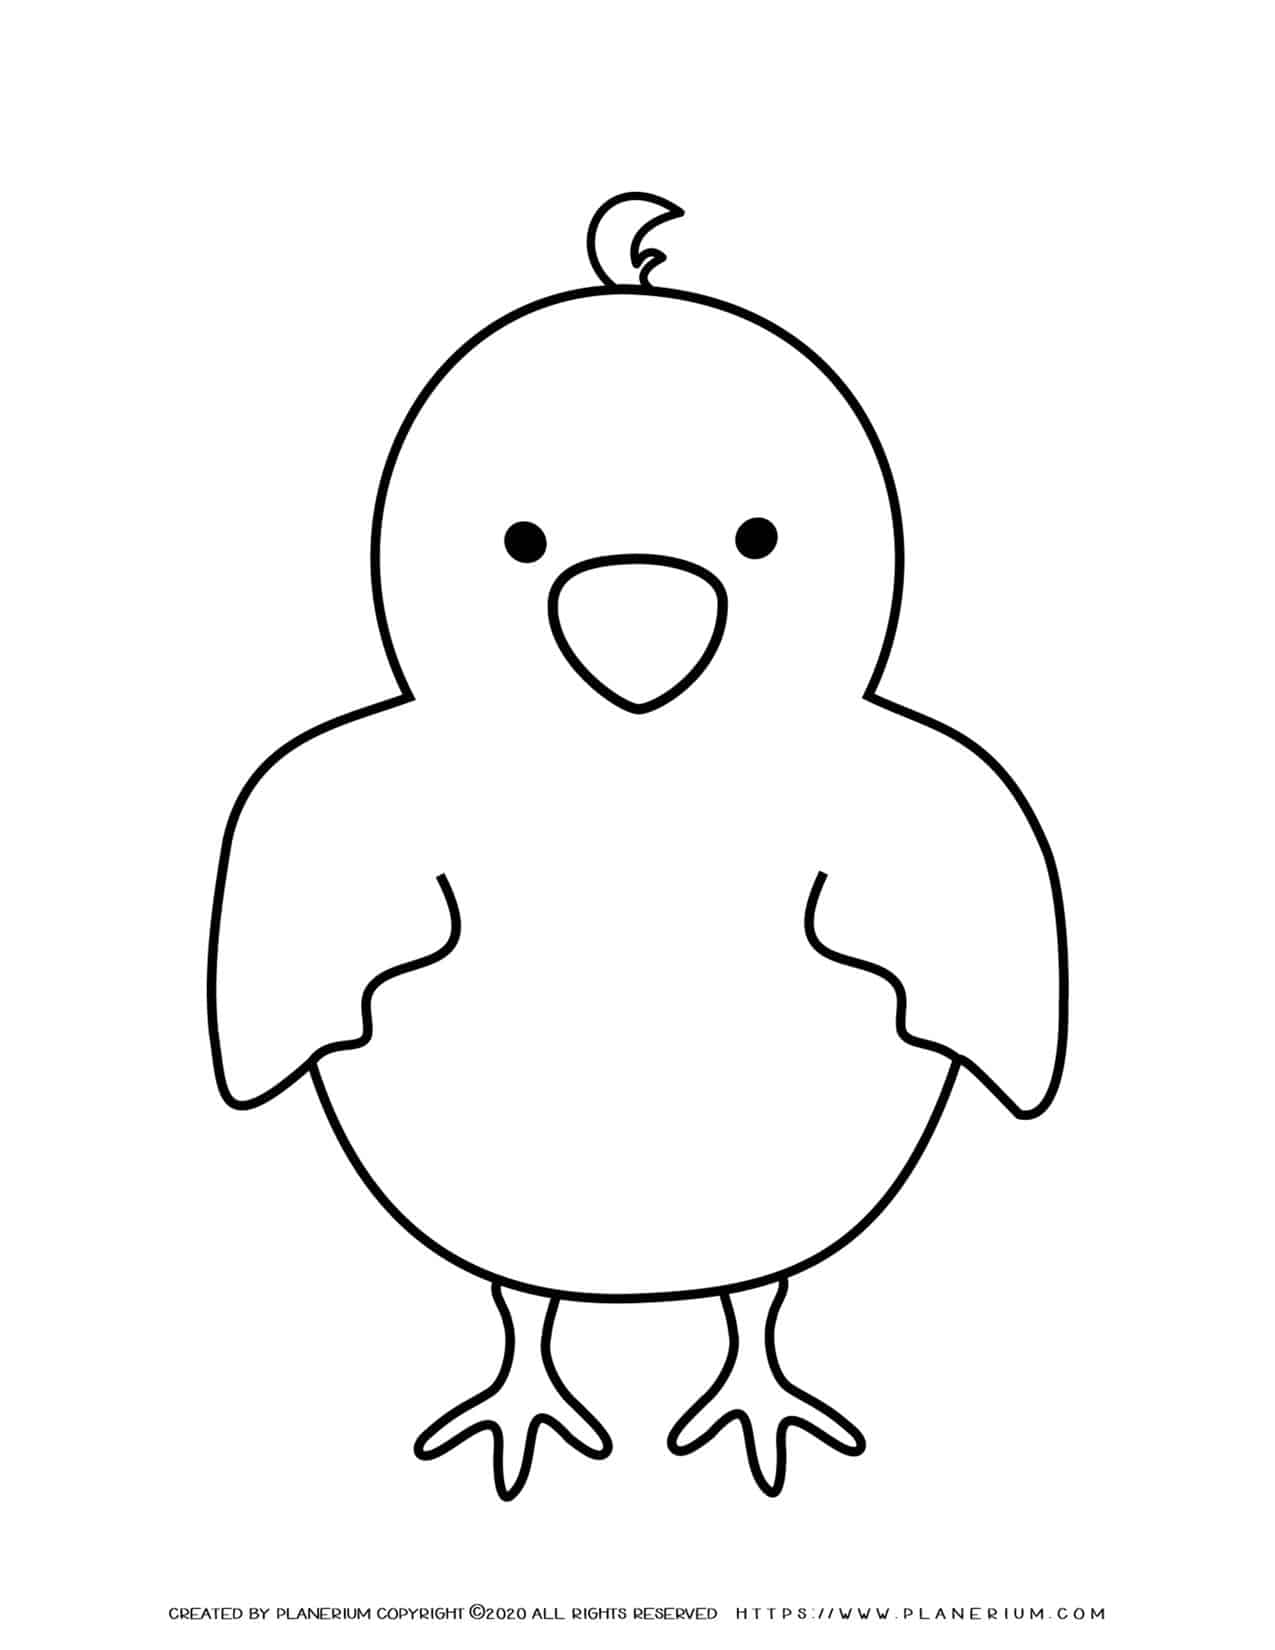 Baby Chick   Coloring Pages   Planerium